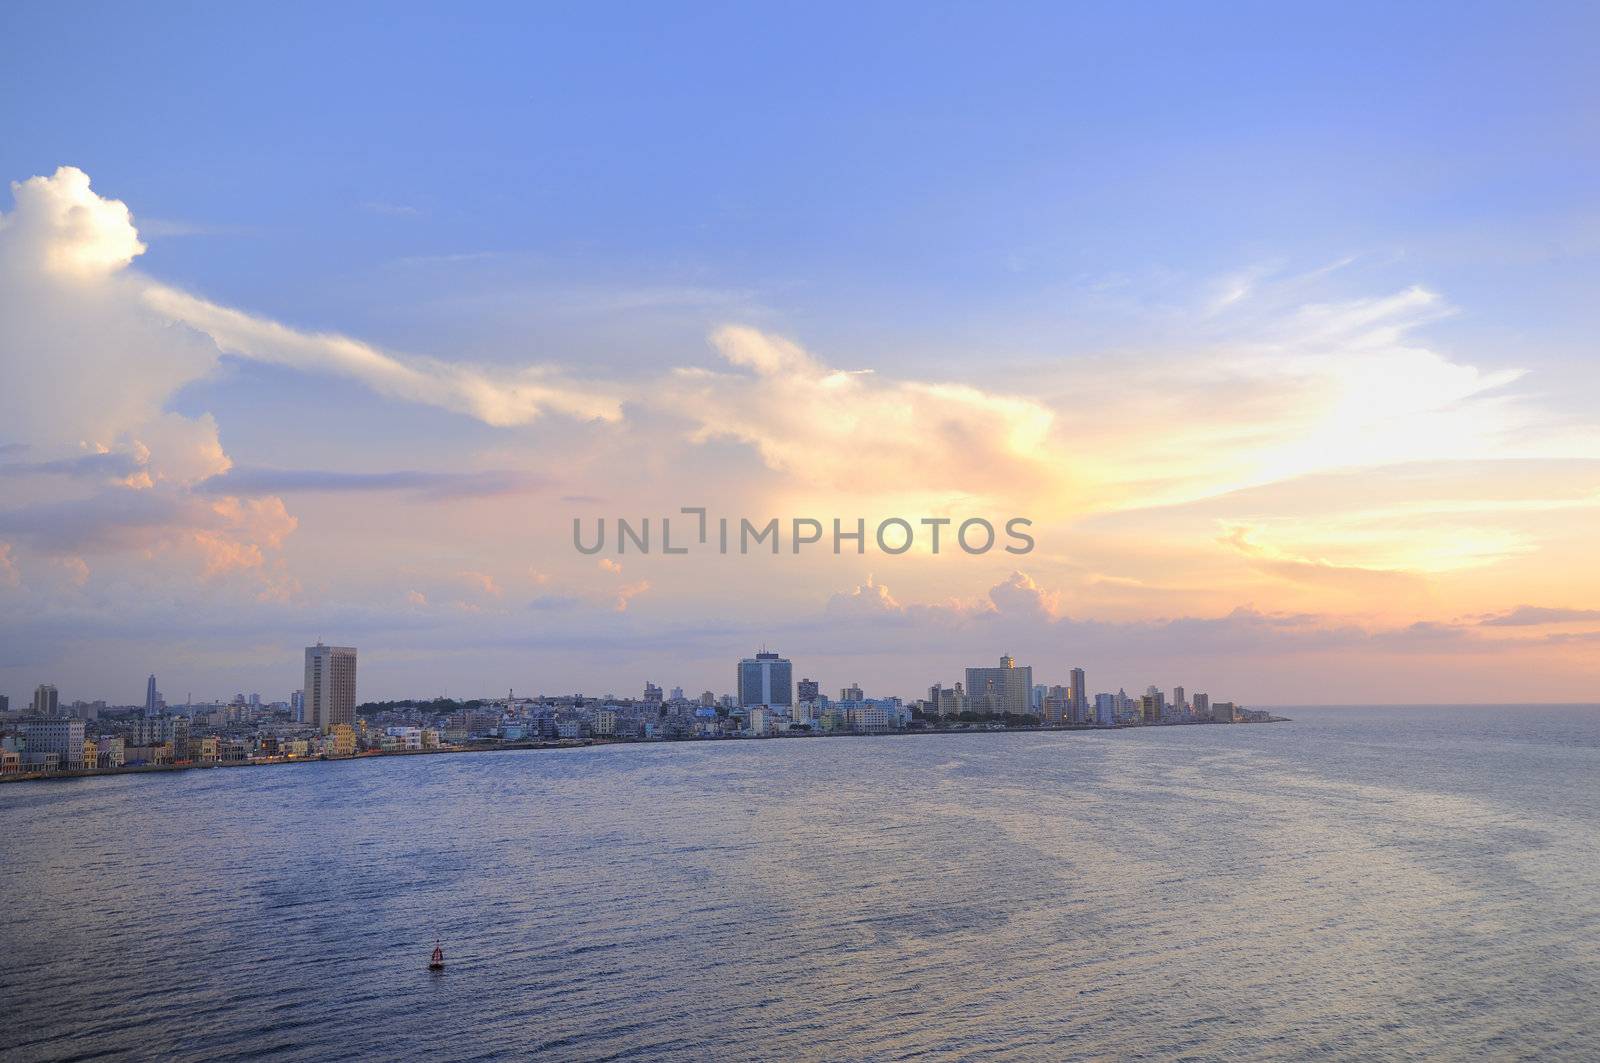 Havana cityscape at sunset by rgbspace